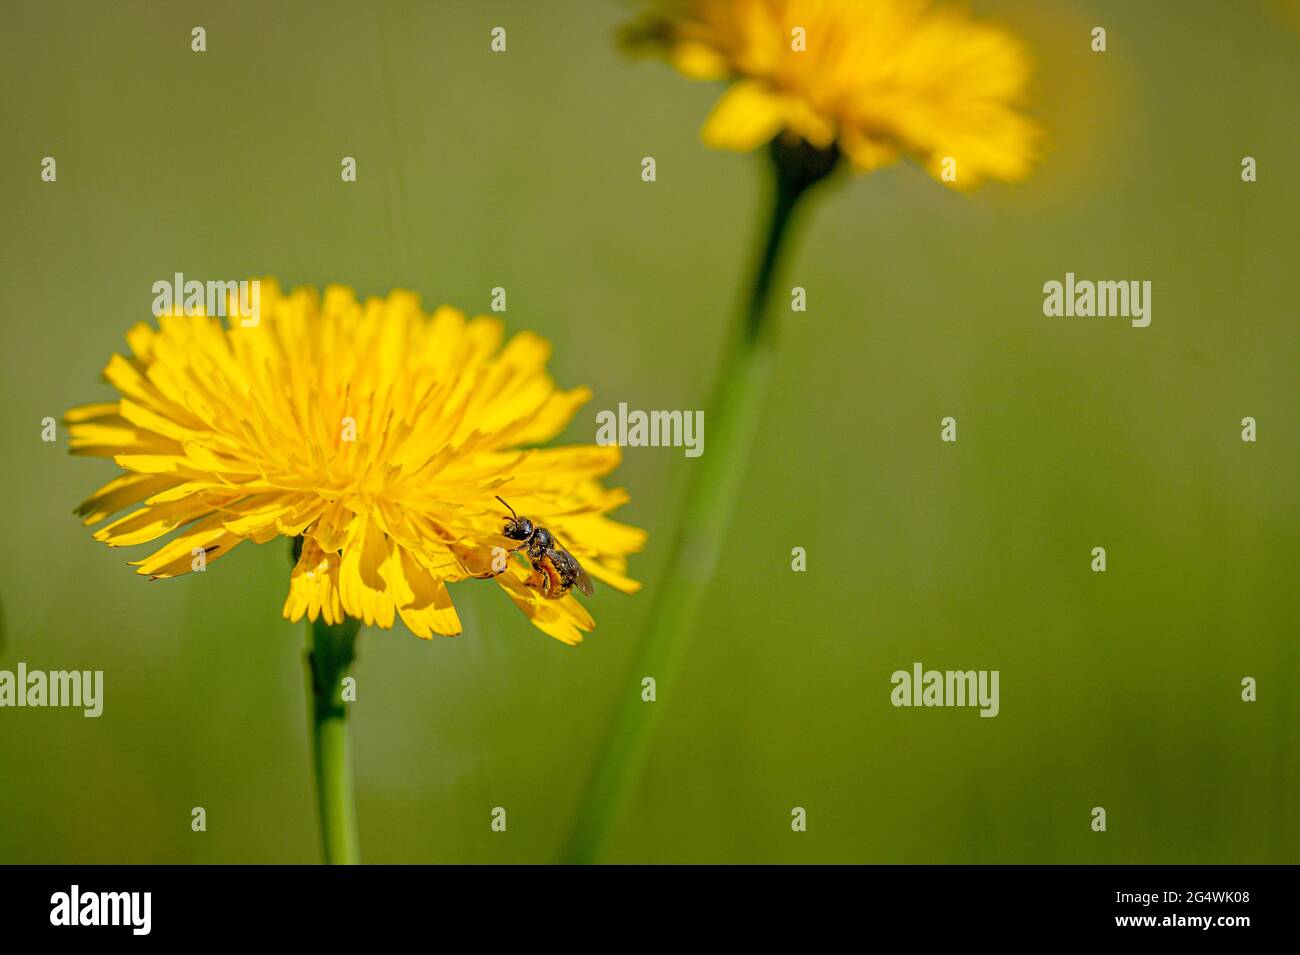 Black soldier fly, hermetia illucens, collecting pollen from a dandelion flower Stock Photo